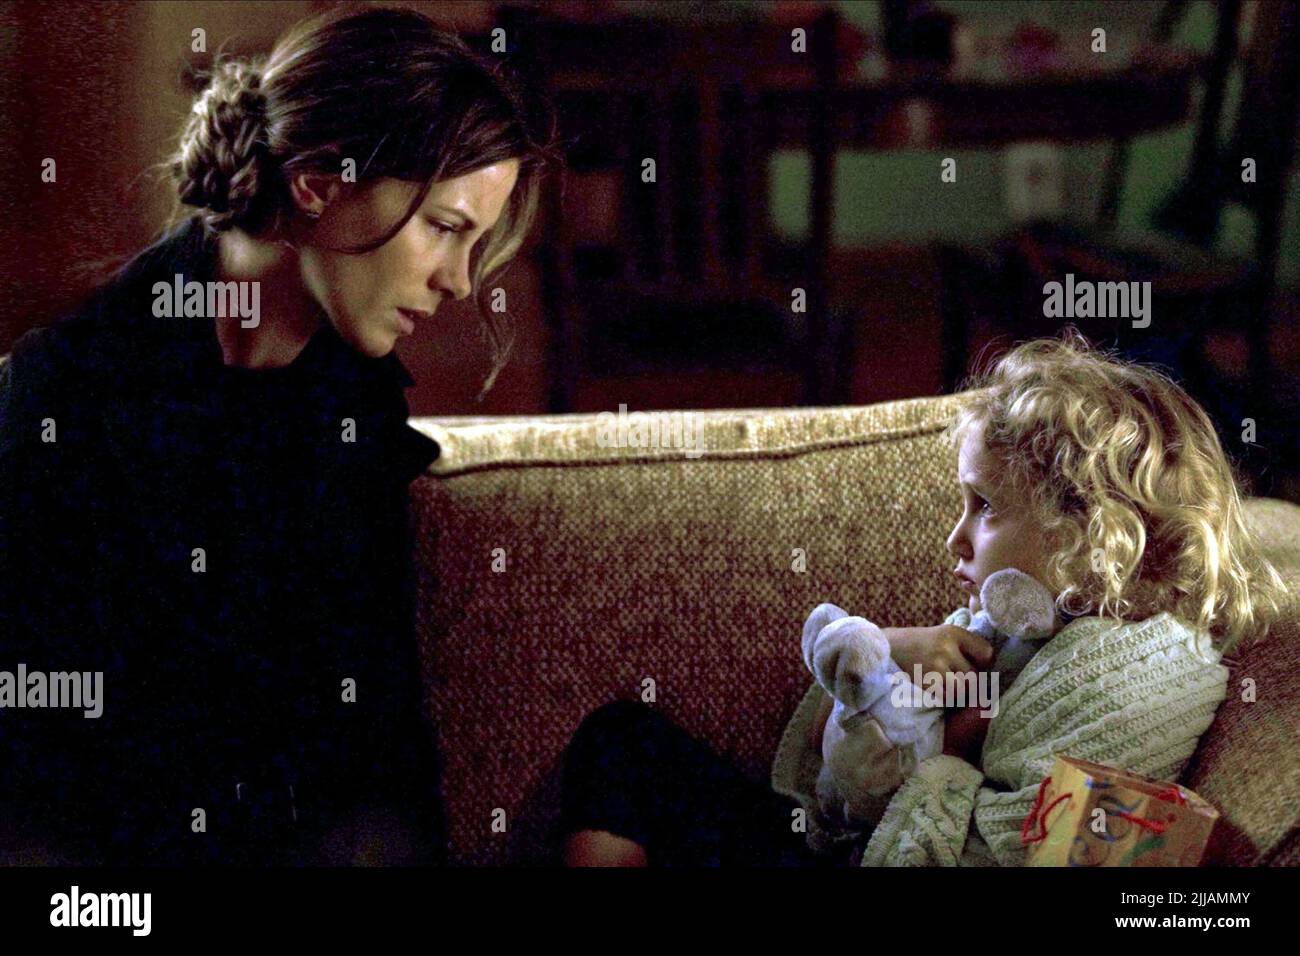 KATE BECKINSALE, AVA KOLKER, THE TRIALS OF CATE MCCALL, 2013 Stock Photo